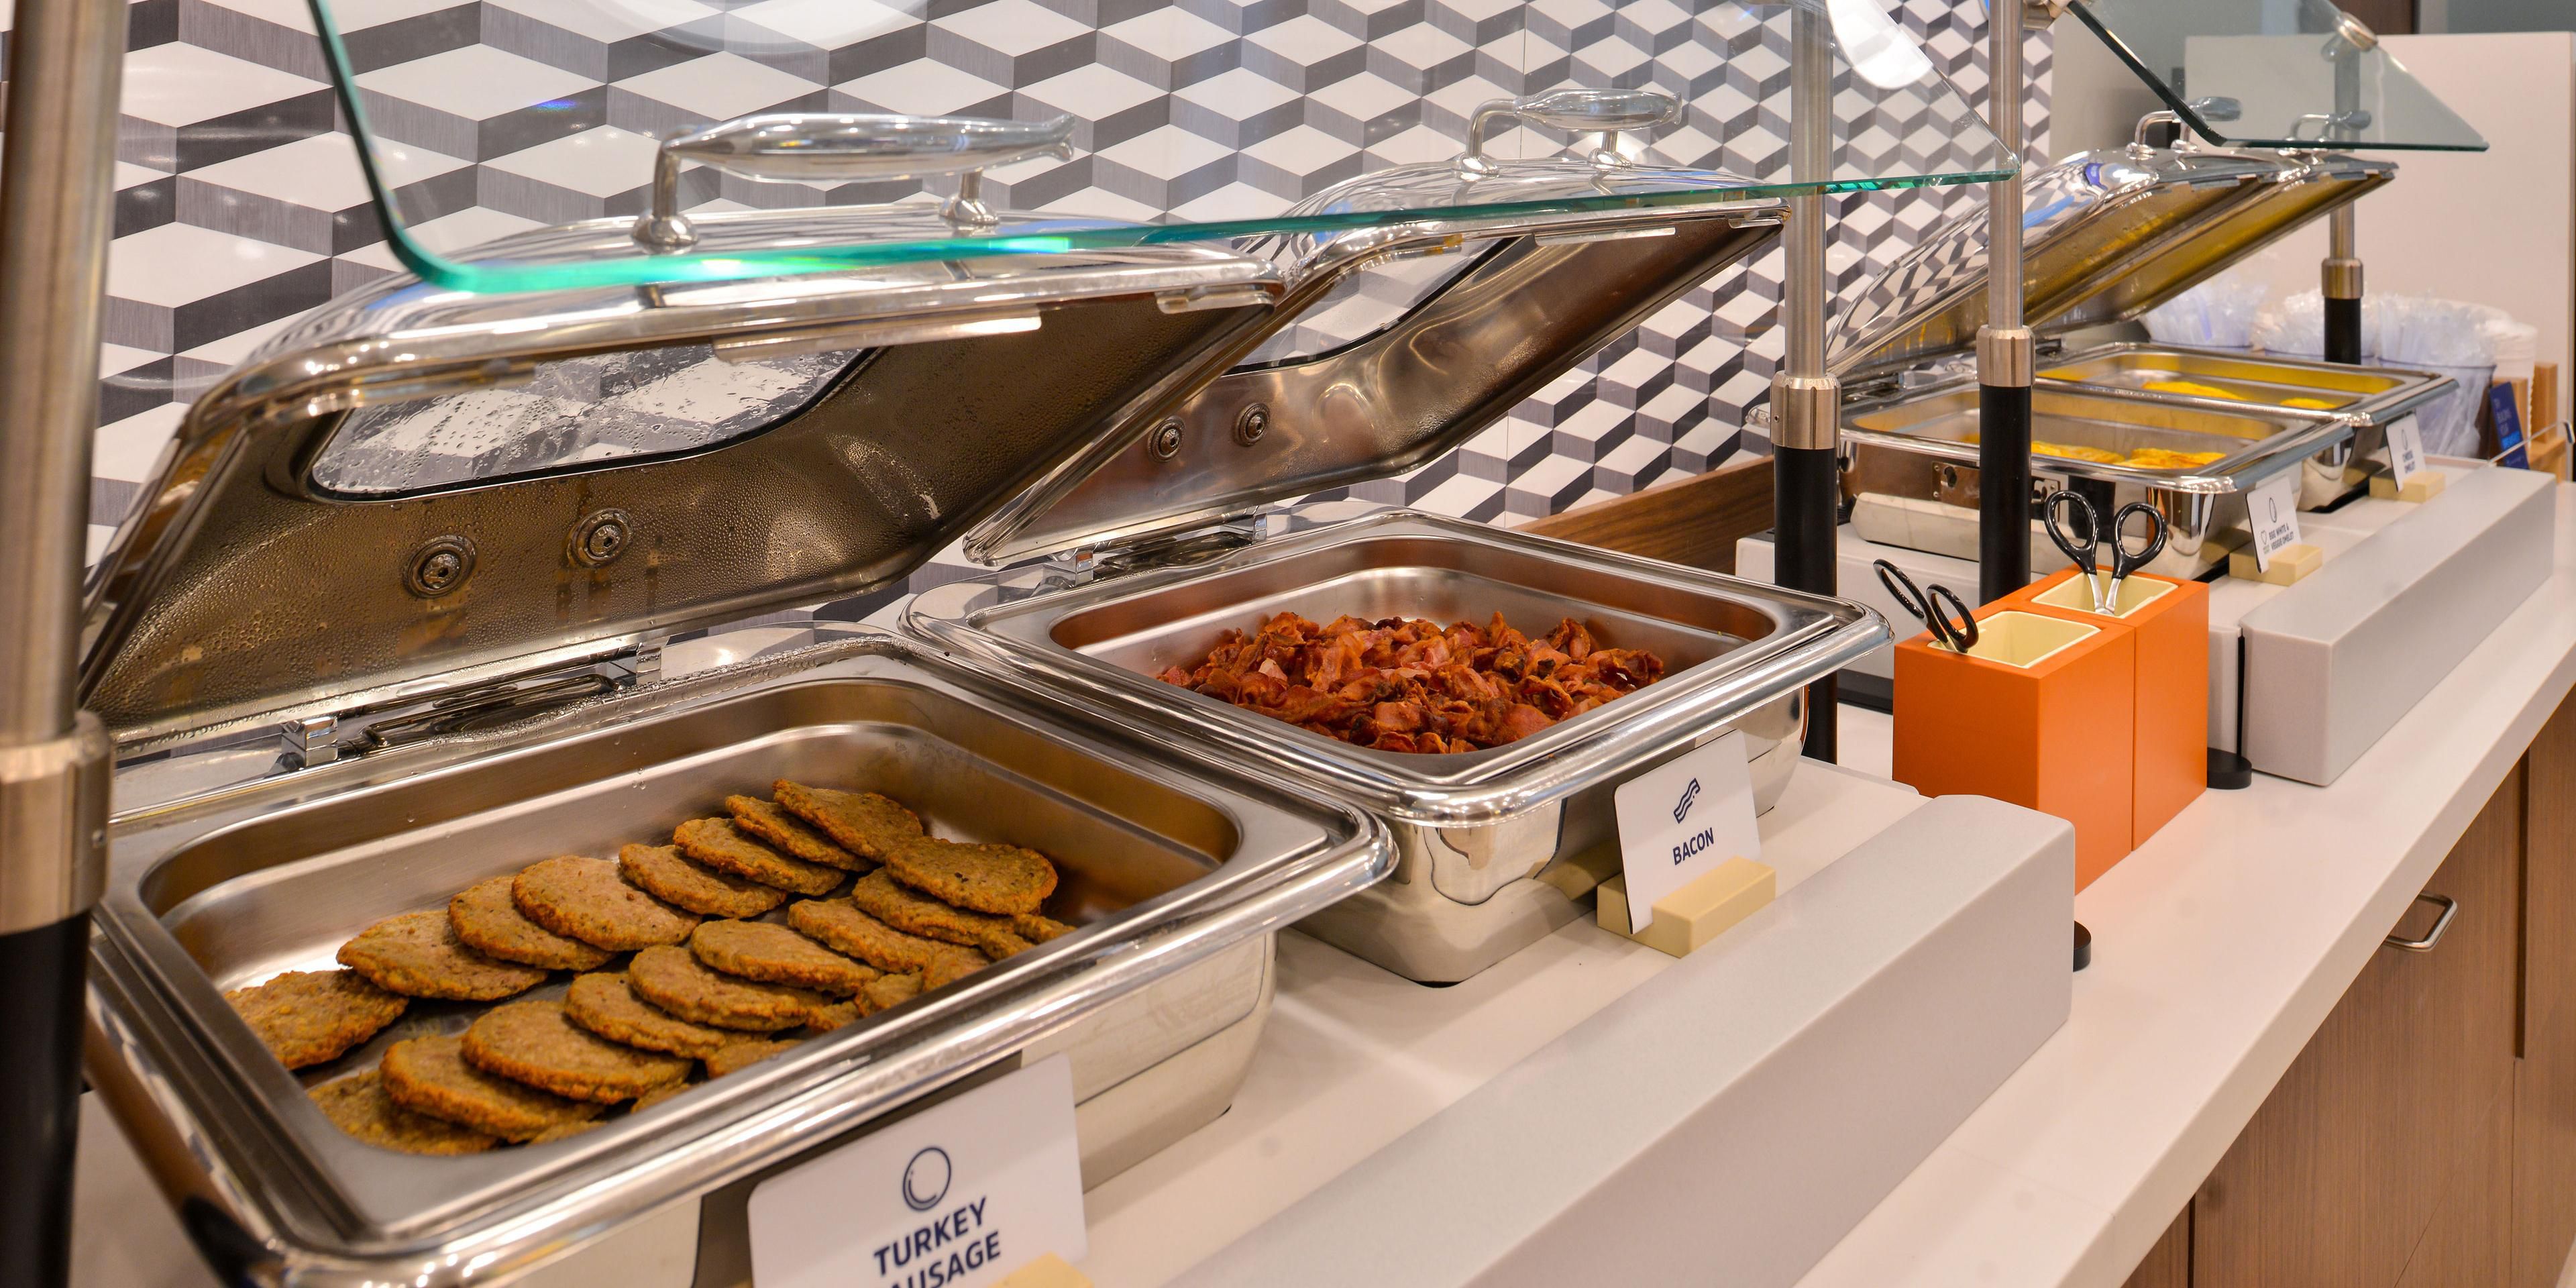 We offer the Express Start Breakfast with hot and cold food and beverage offerings.